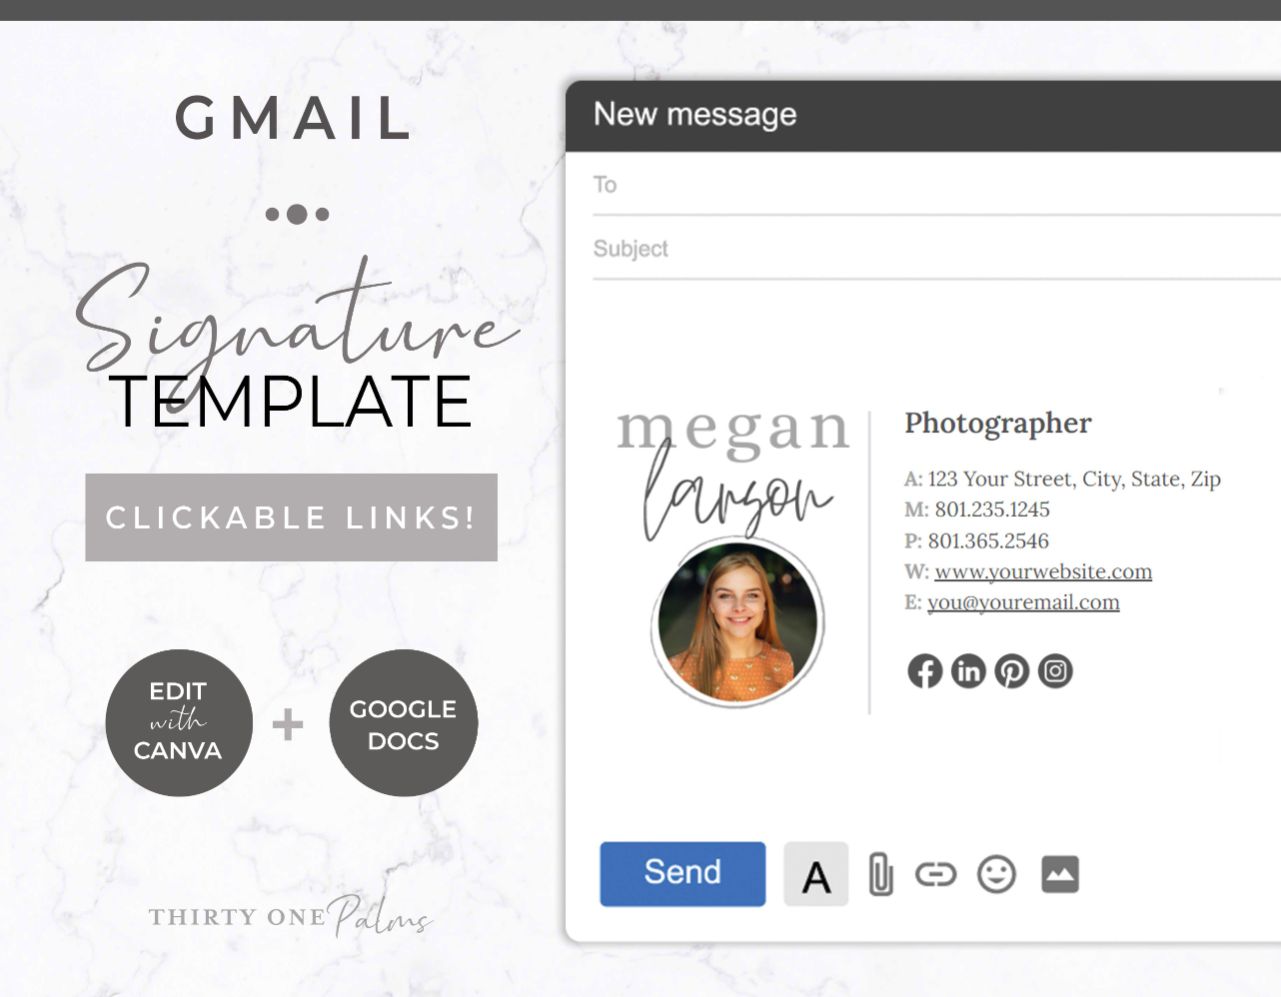 Gmail Email Signature Template for Canva – Grey